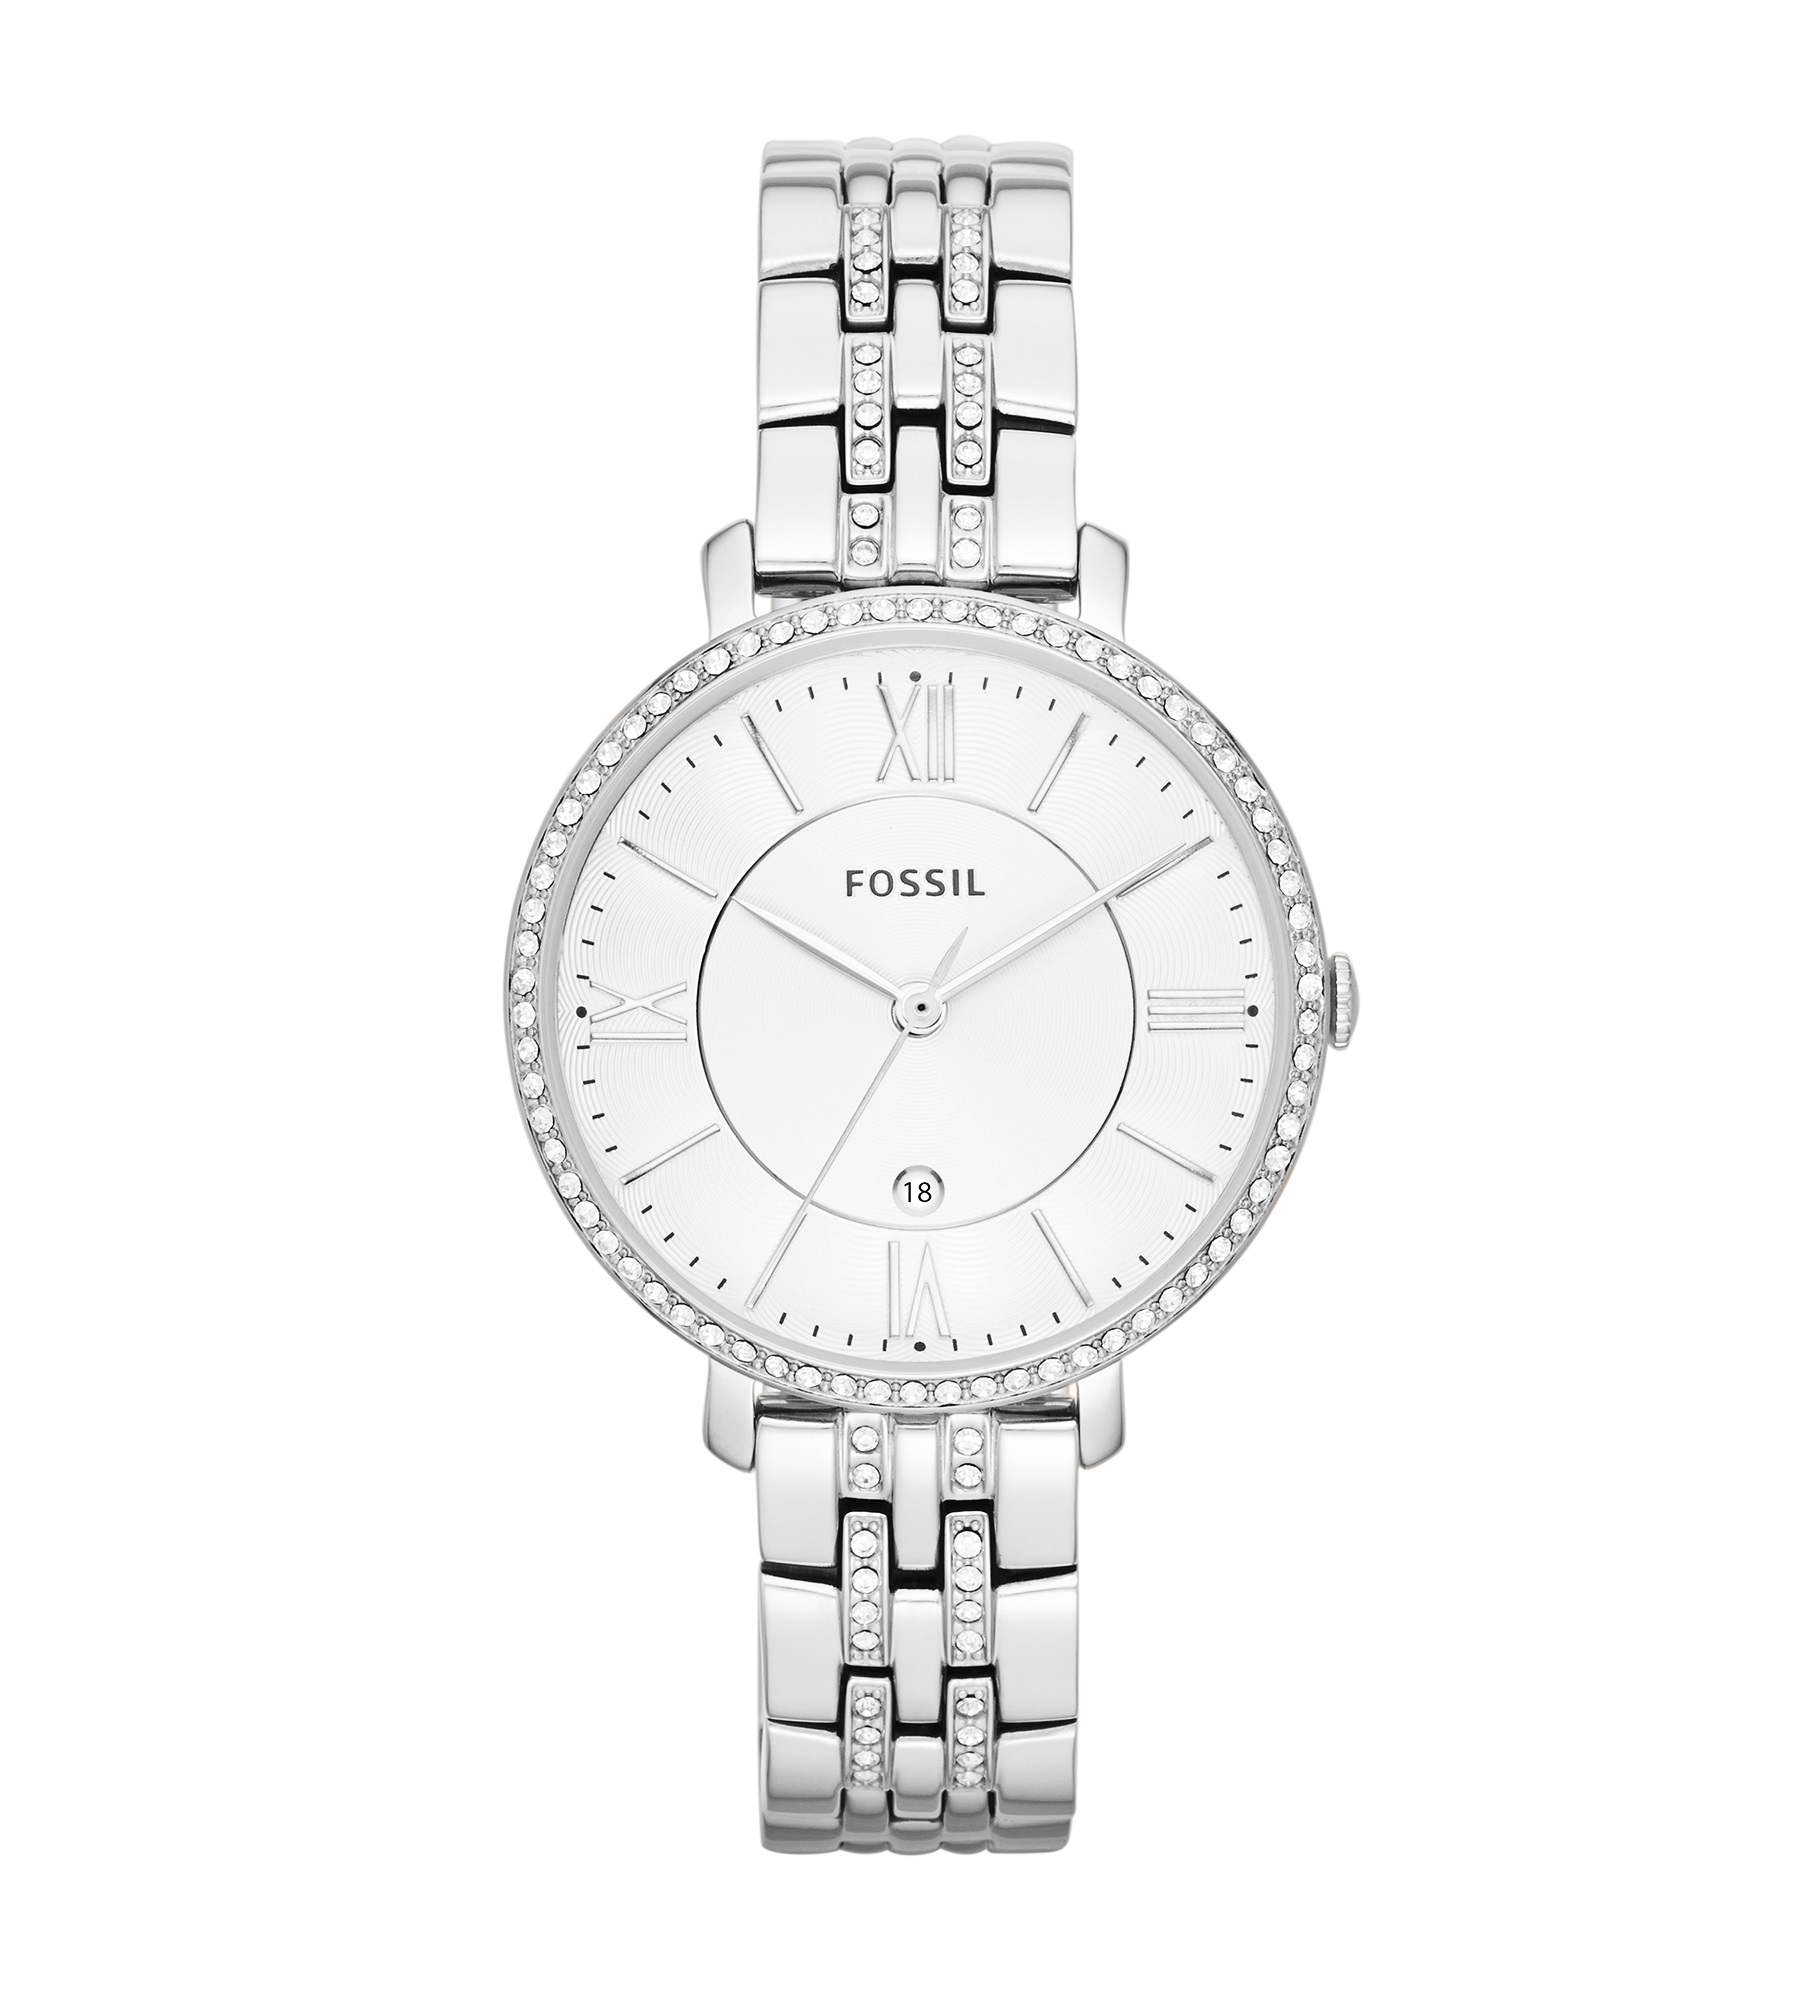  Engraved Fossil Women's Jacqueline Pave Silver Watch